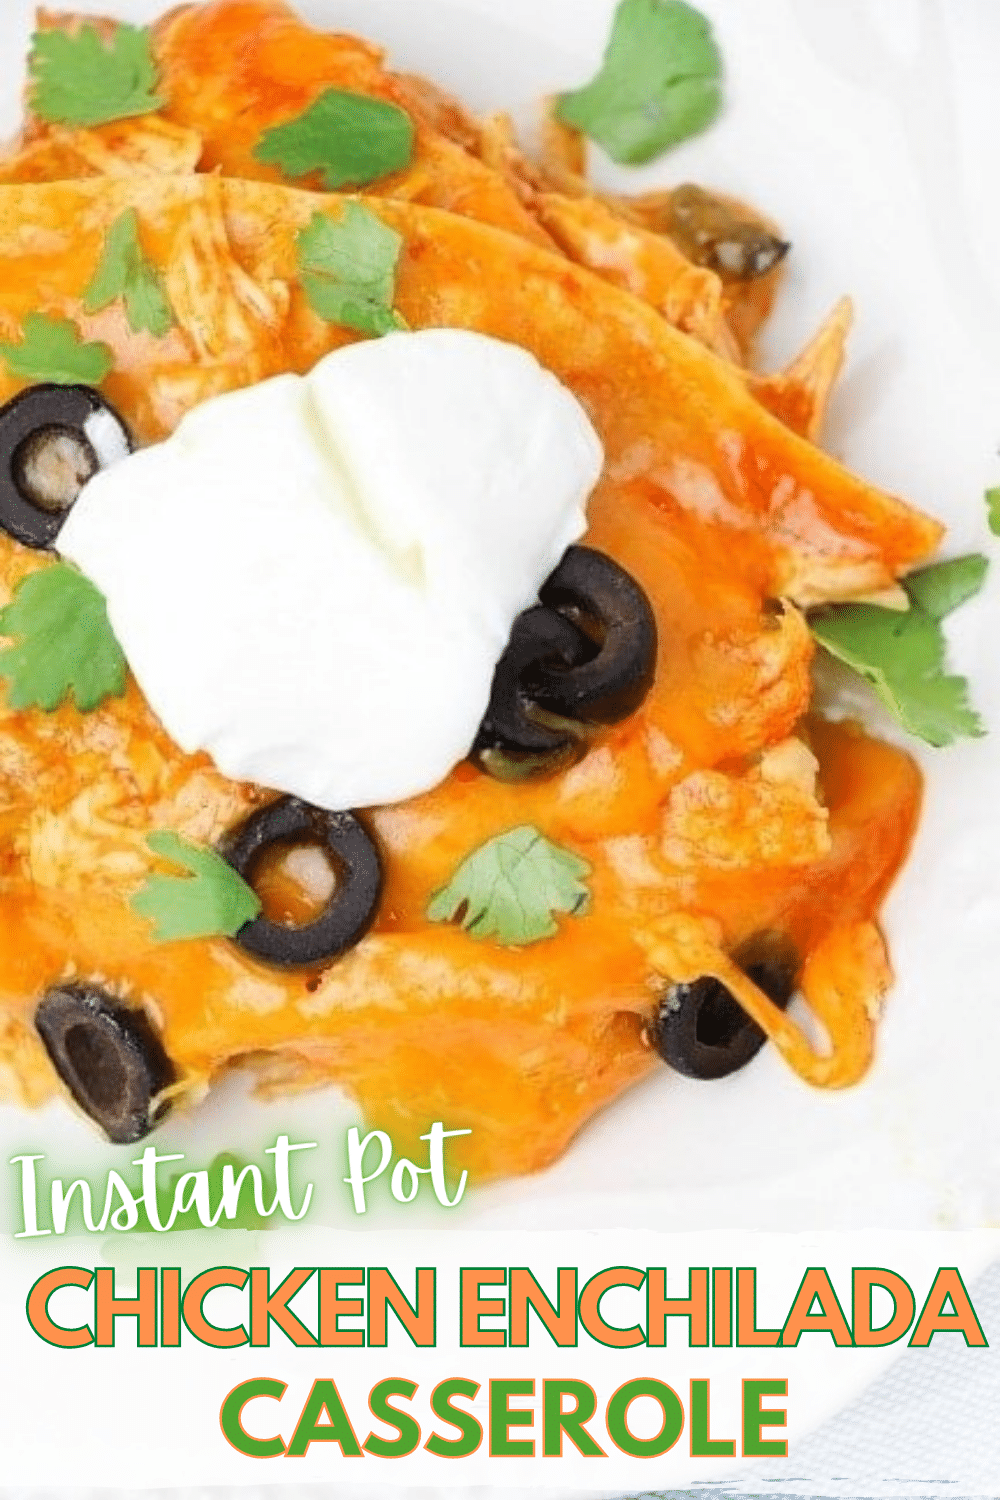 This Instant Pot Chicken Enchilada Casserole is one of the few dinners my whole family eats without complaining. I love that it's so easy and only calls for a few simple ingredients! #instantpot #pressurecooker #chickenenchilada #casserole via @wondermomwannab